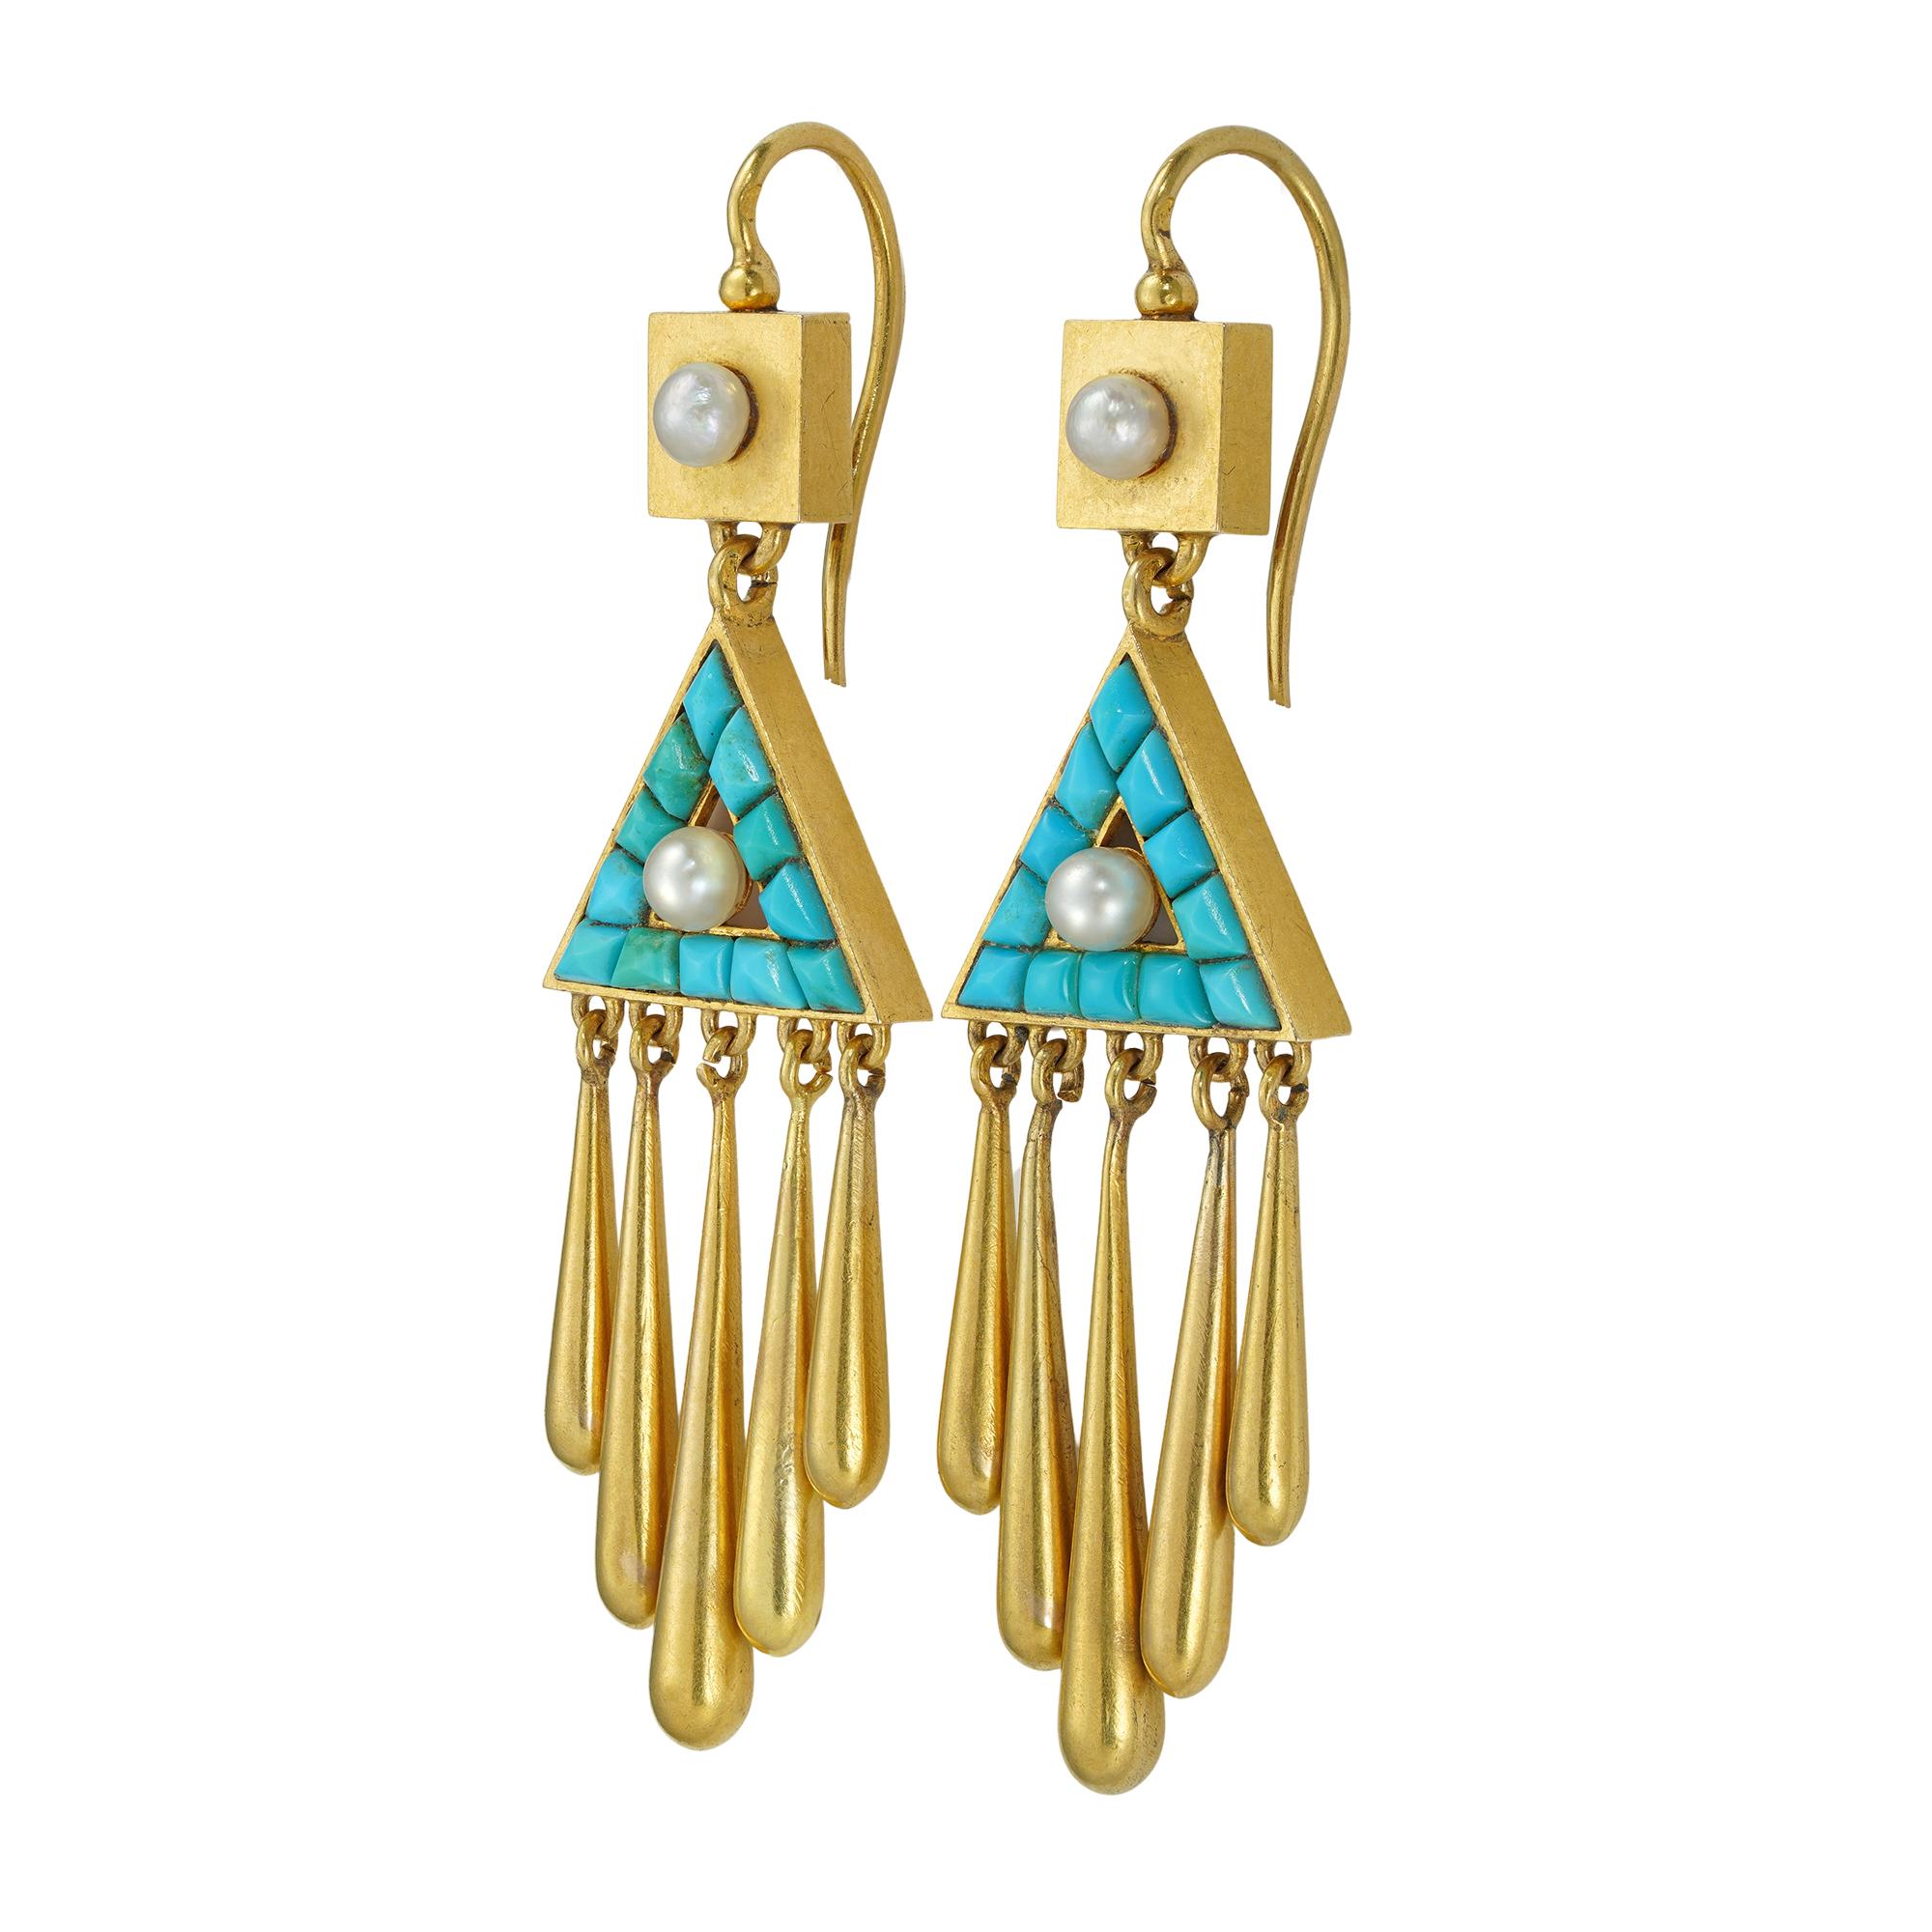 A pair of Victorian turquoise and pearl drop earrings, each with a triangle centrally-set with a pearl surrounded by twelve calibre-cut turquoises suspending five gold drops, all suspended by a square-shaped top centrally-set with a pearl, all